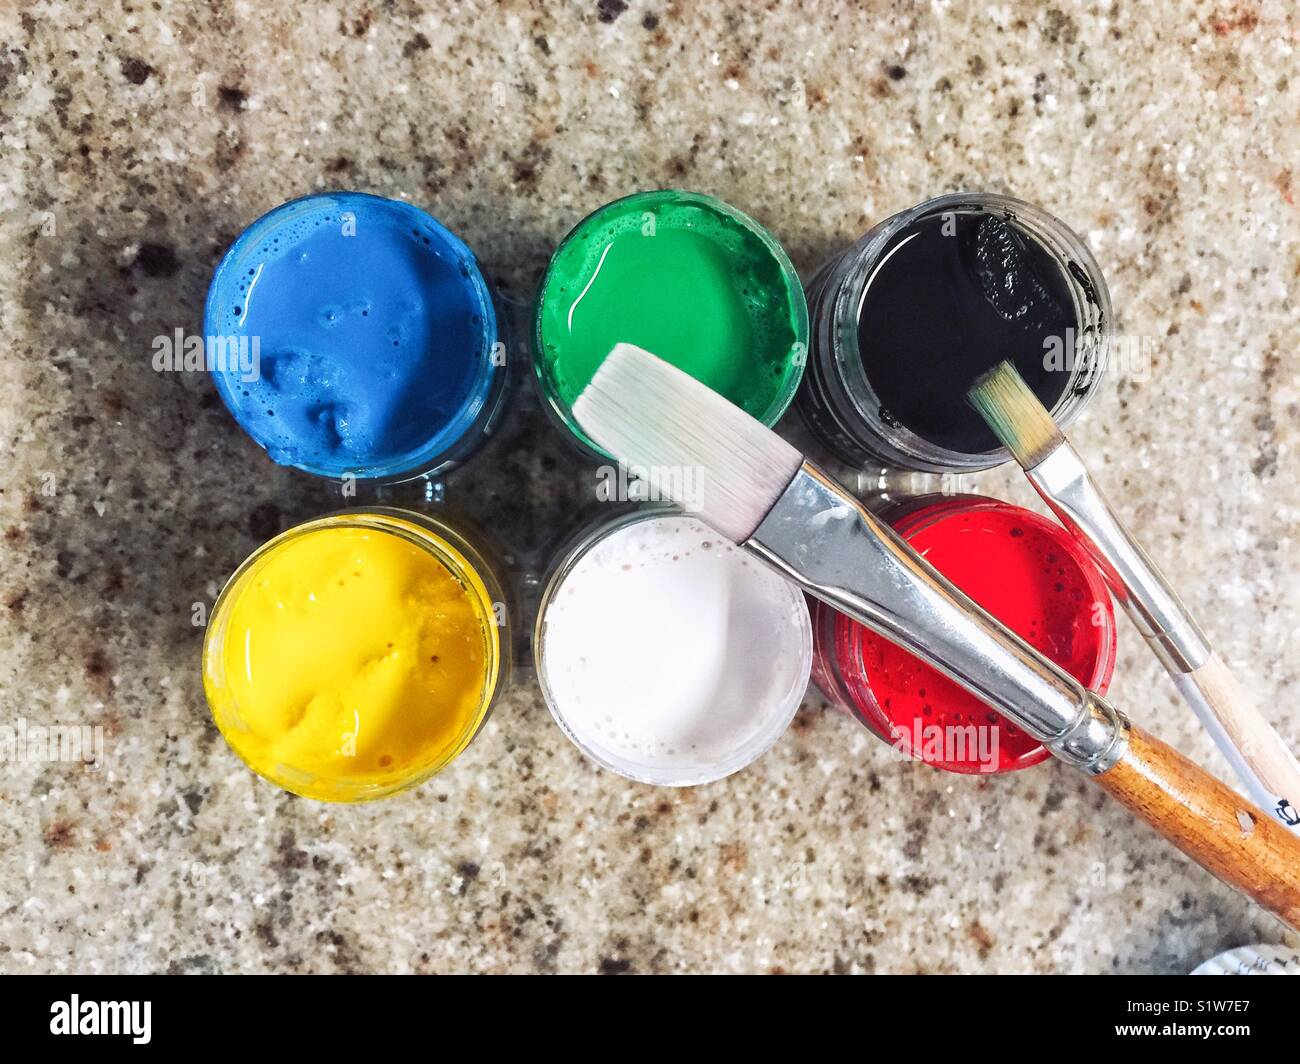 Open containers with paints and brushes on granite countertop, top view Stock Photo